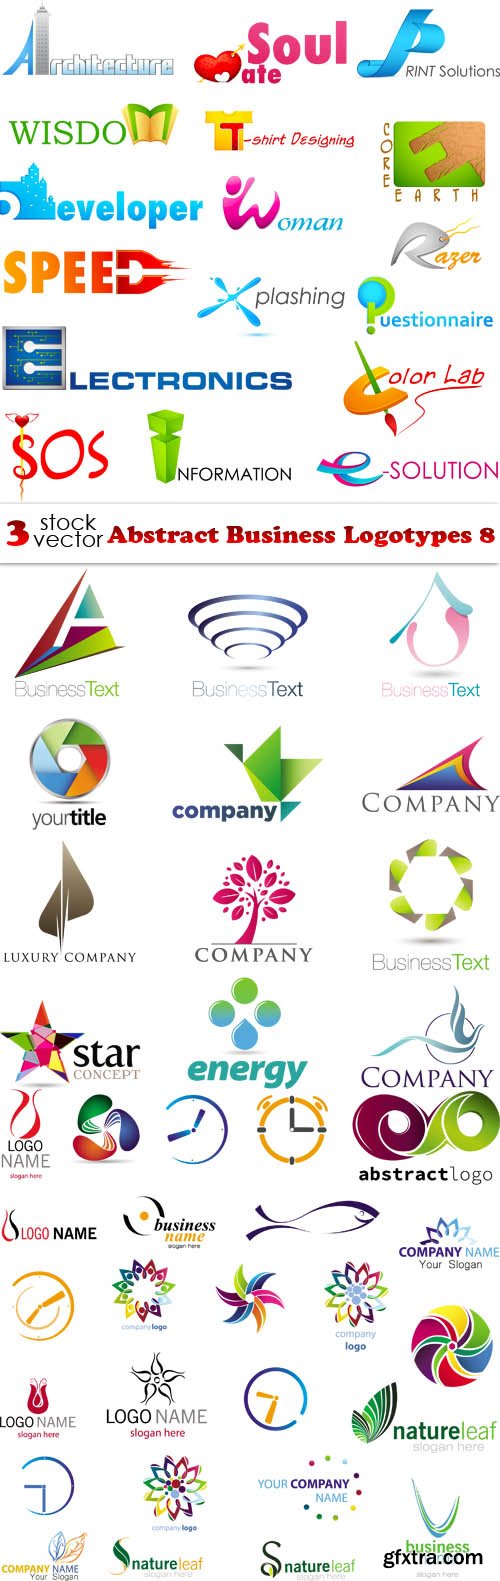 Vectors - Abstract Business Logotypes 8